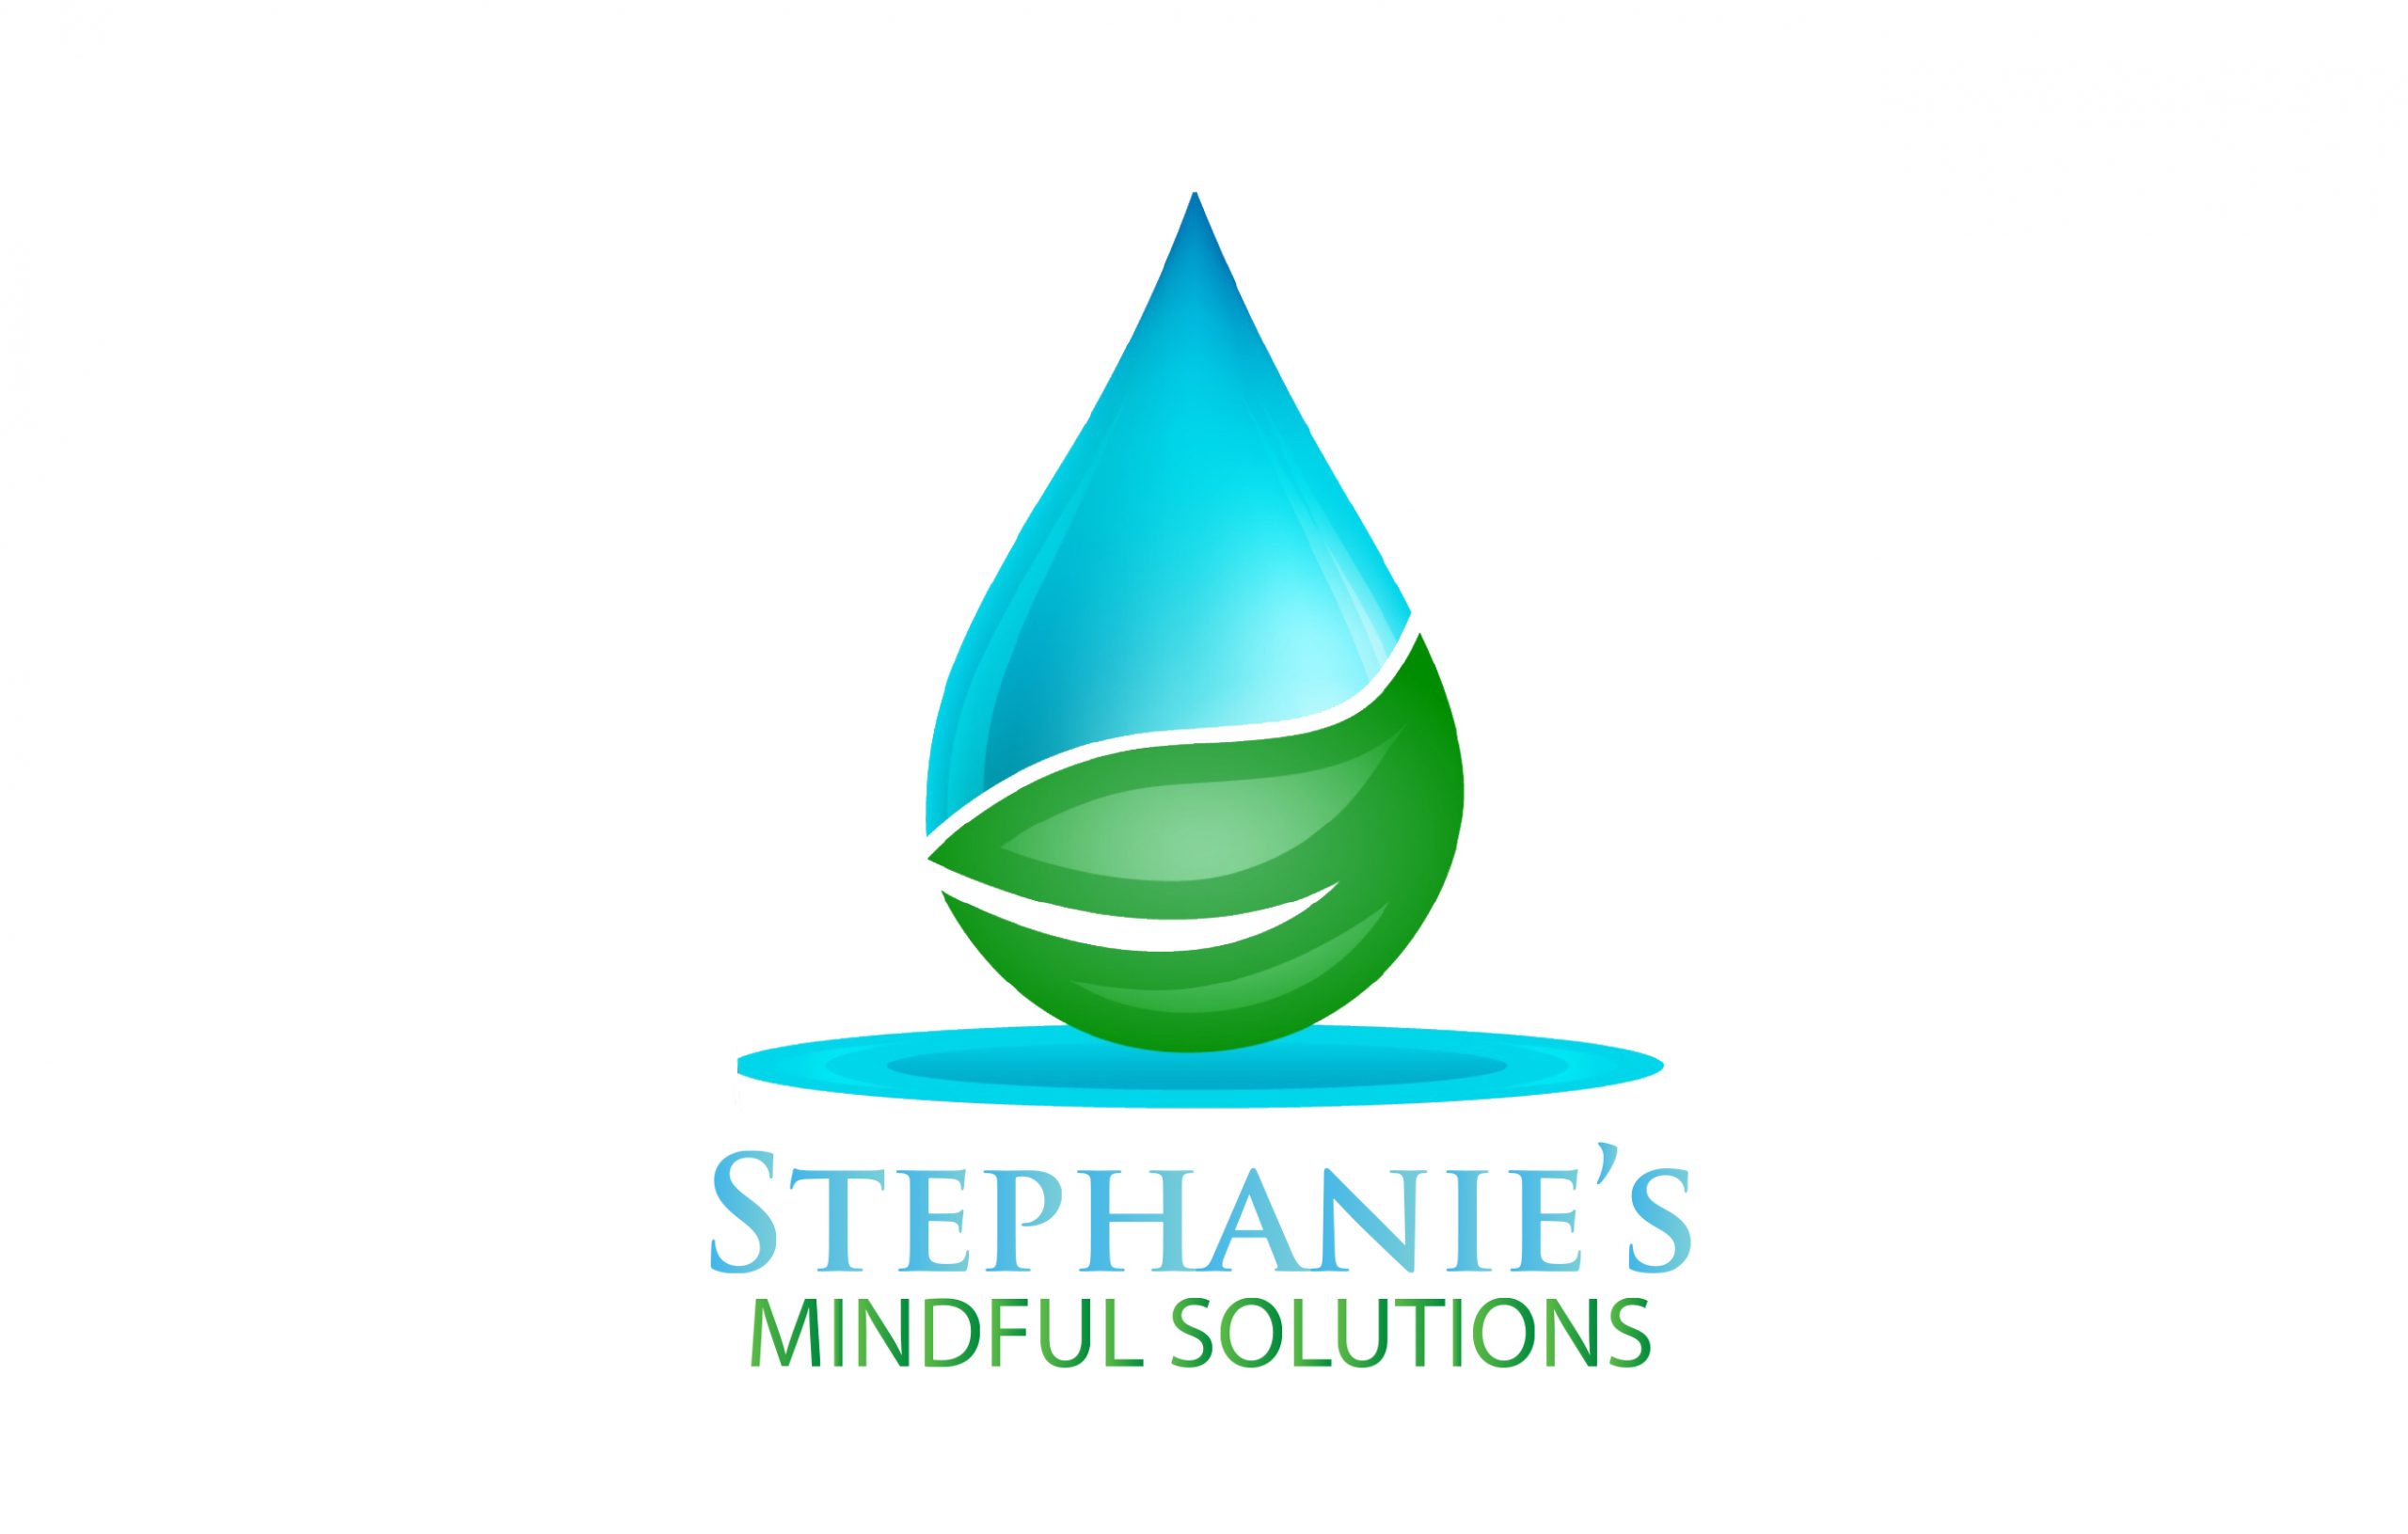 Stephanie's Mindful Solutions